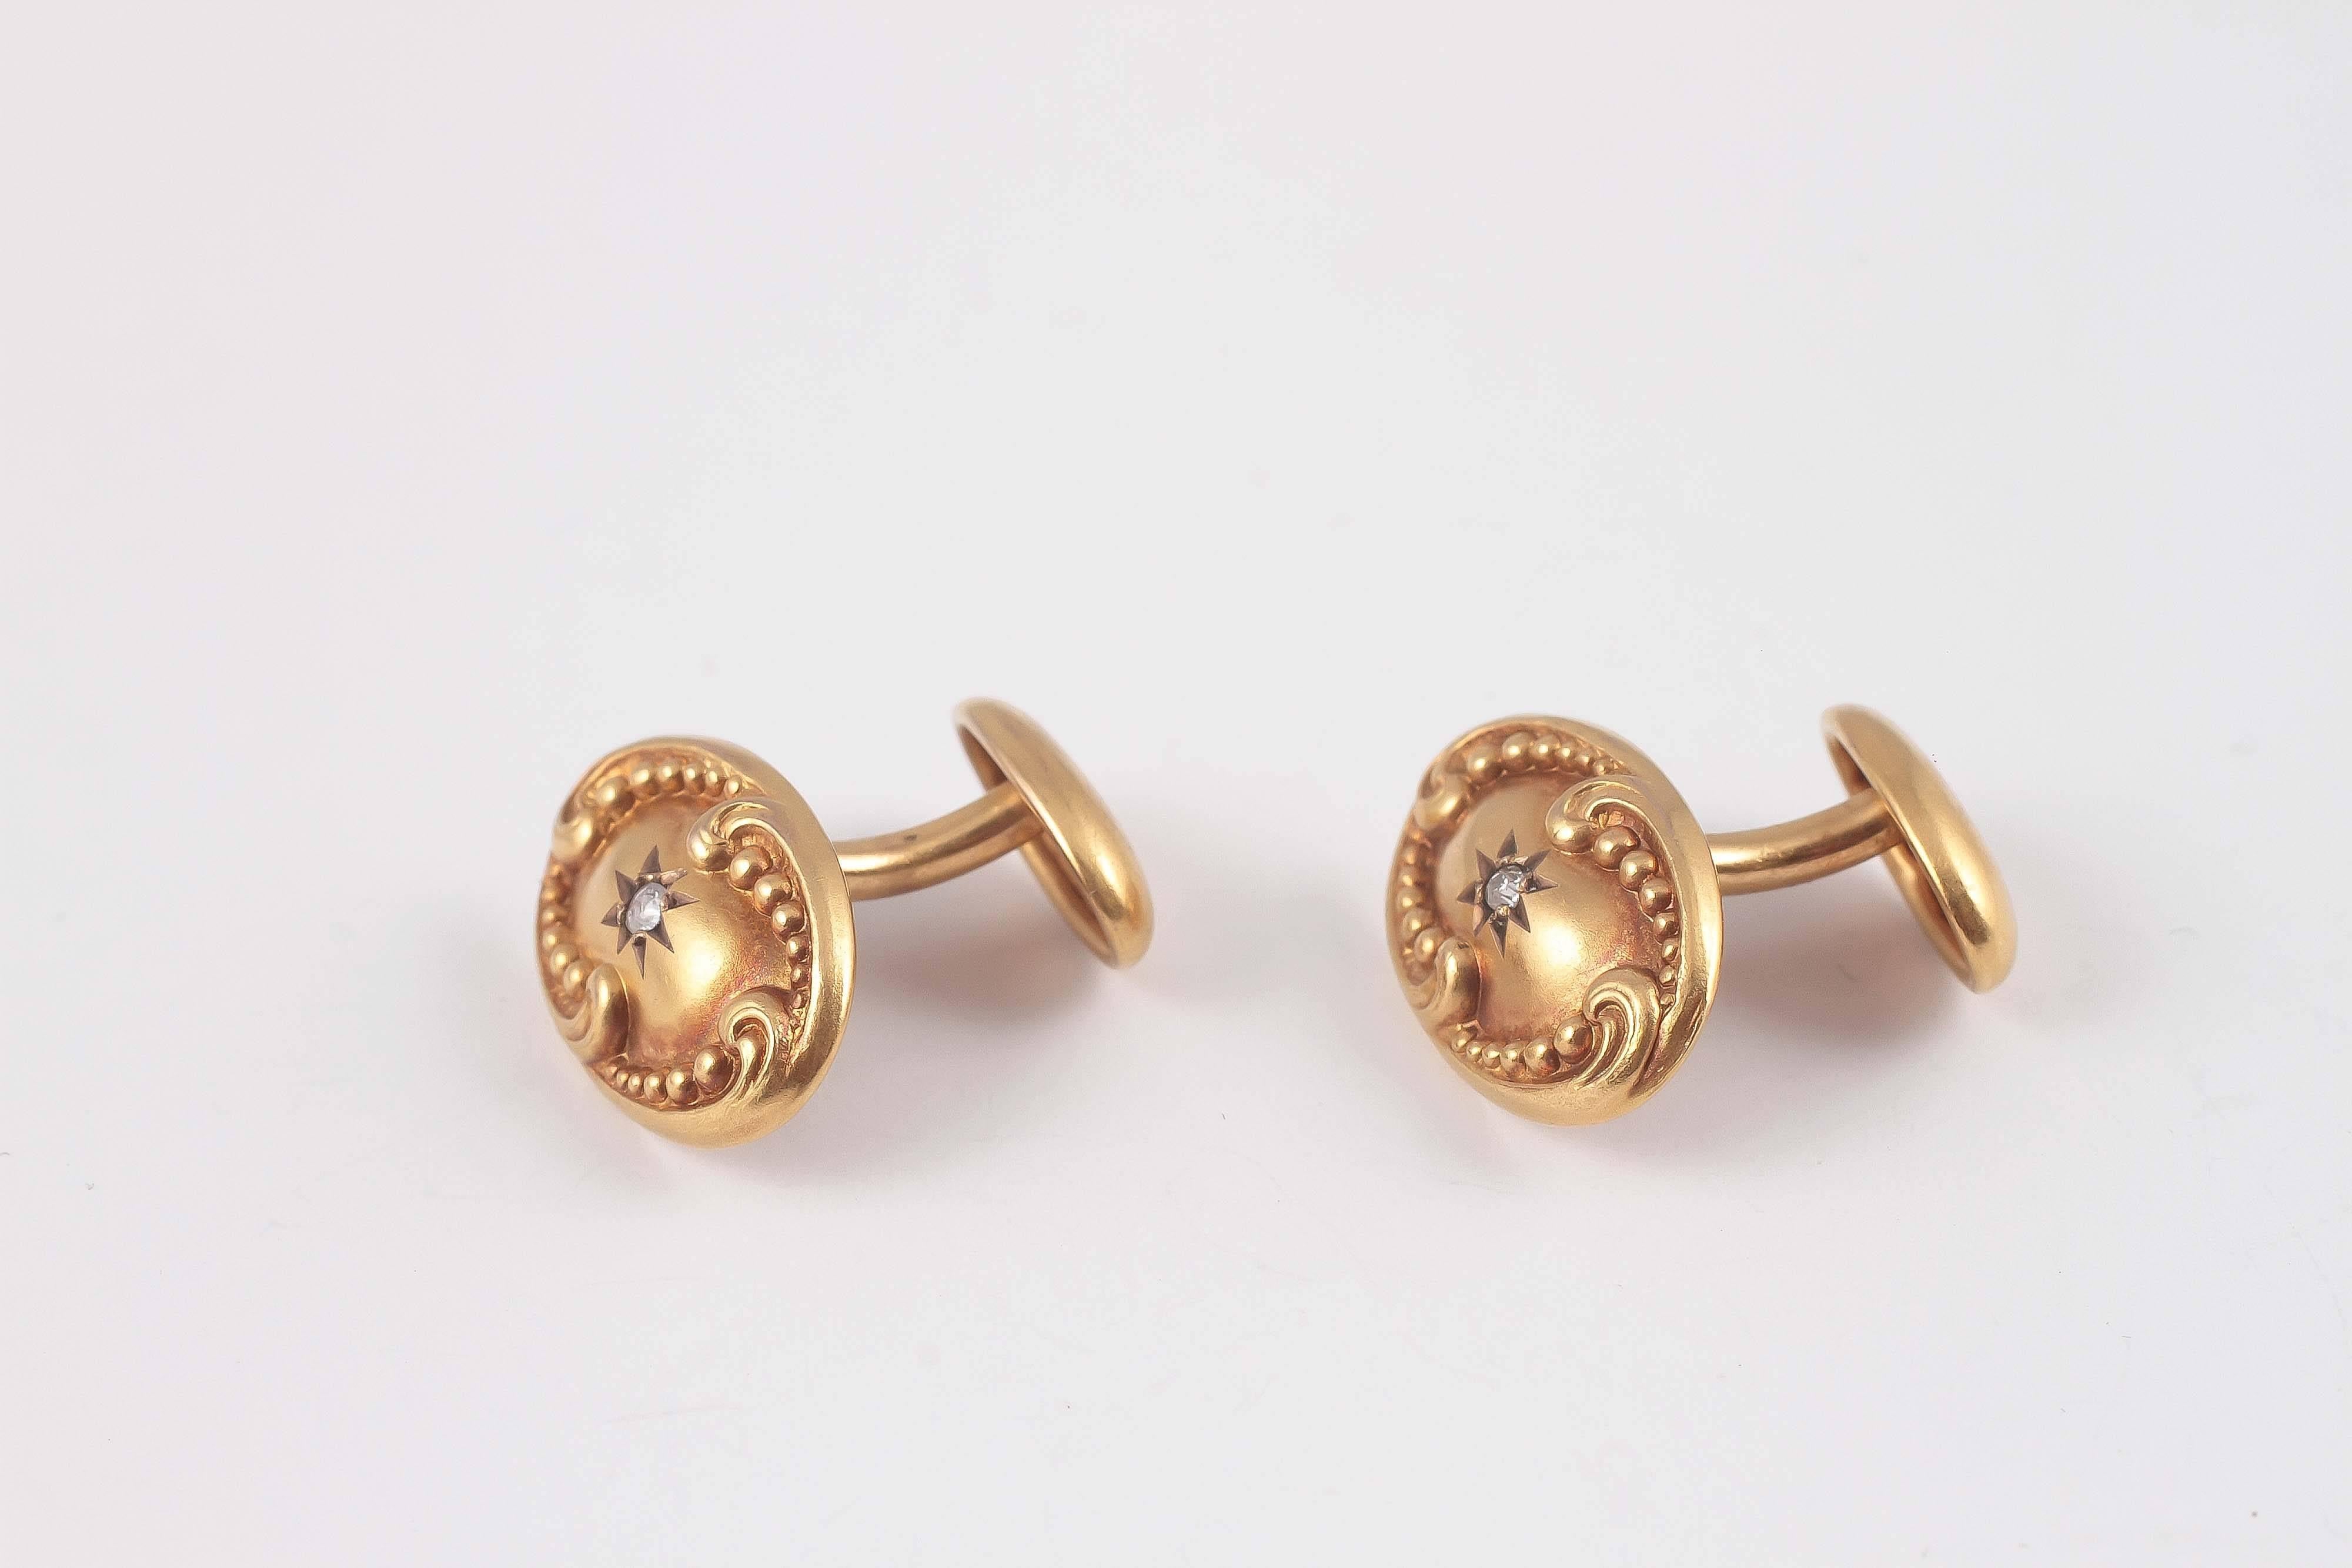 Fabulous bloomed gold cuff-links, from the Art Nouveau period.  Lovely for yourself or as a gift.